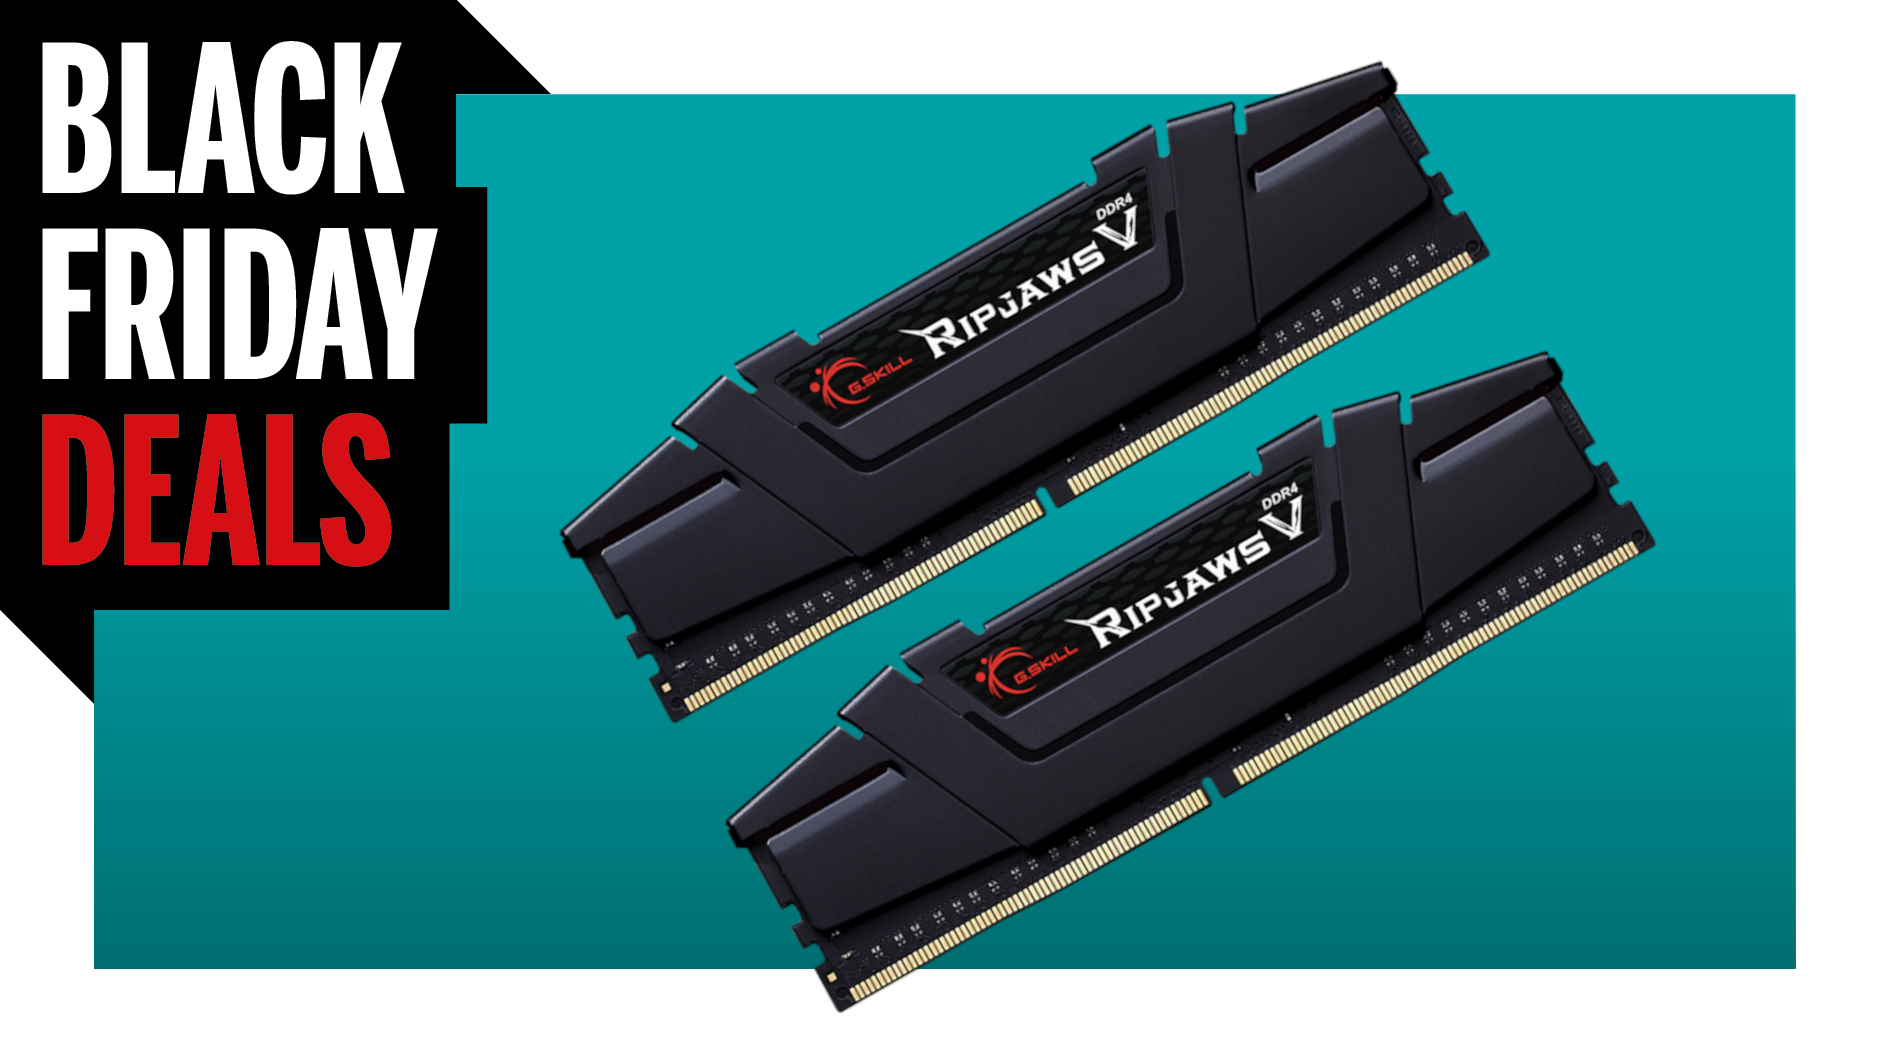  Get a full 32GB of RAM for just $99 with this pair of G.Skill Ripjaws 